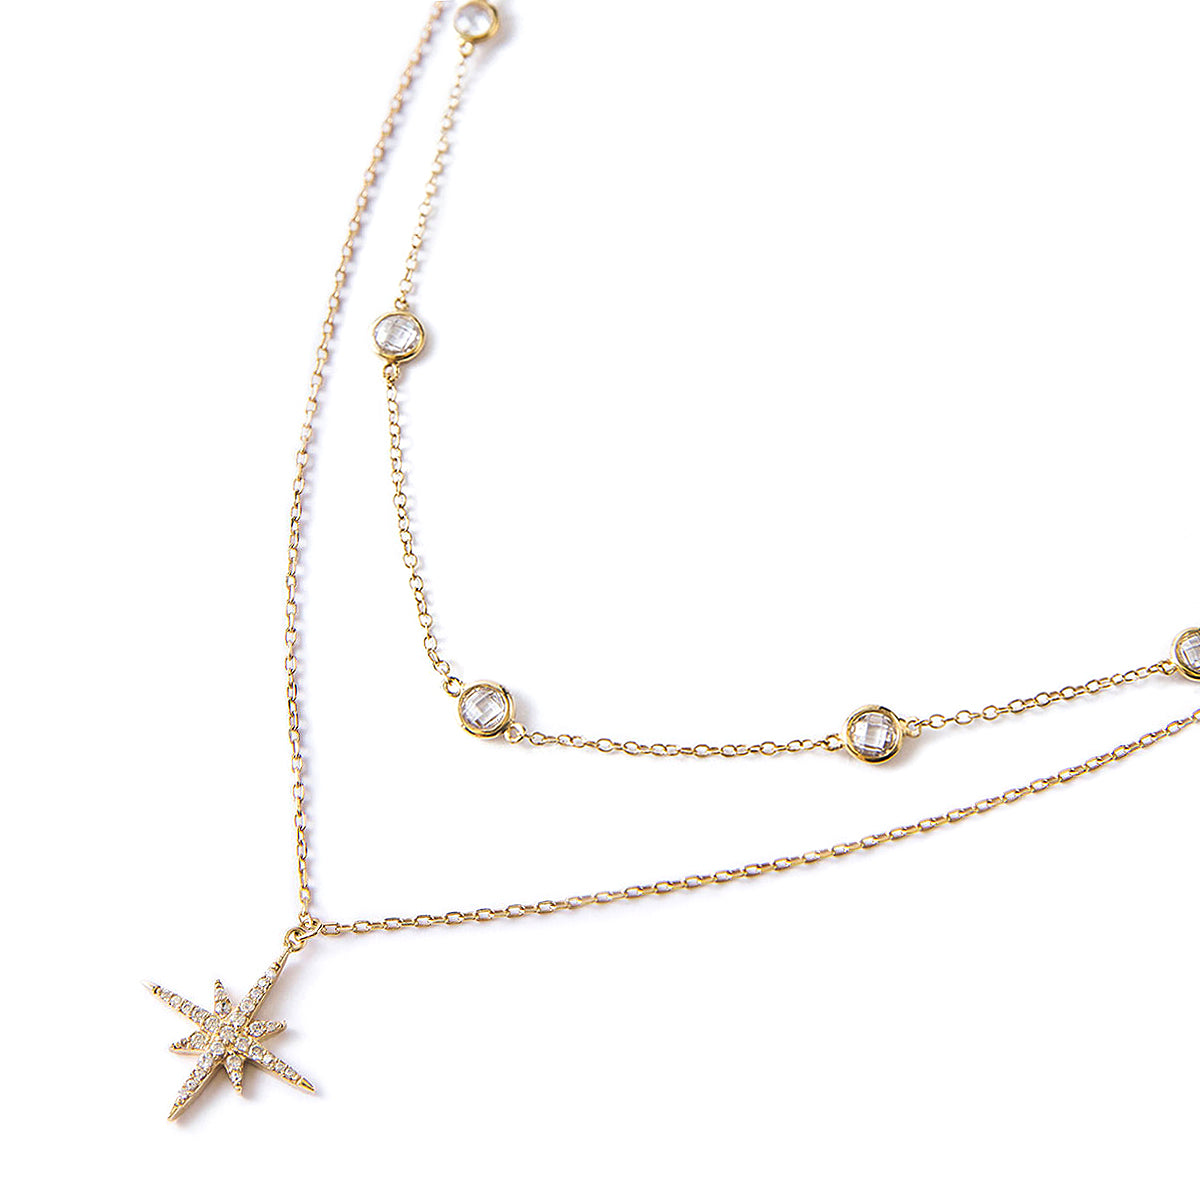 Gold Layered Necklace with Gemstone and Charm Pendant, Dainty Gold Nec –  JewelryByTm